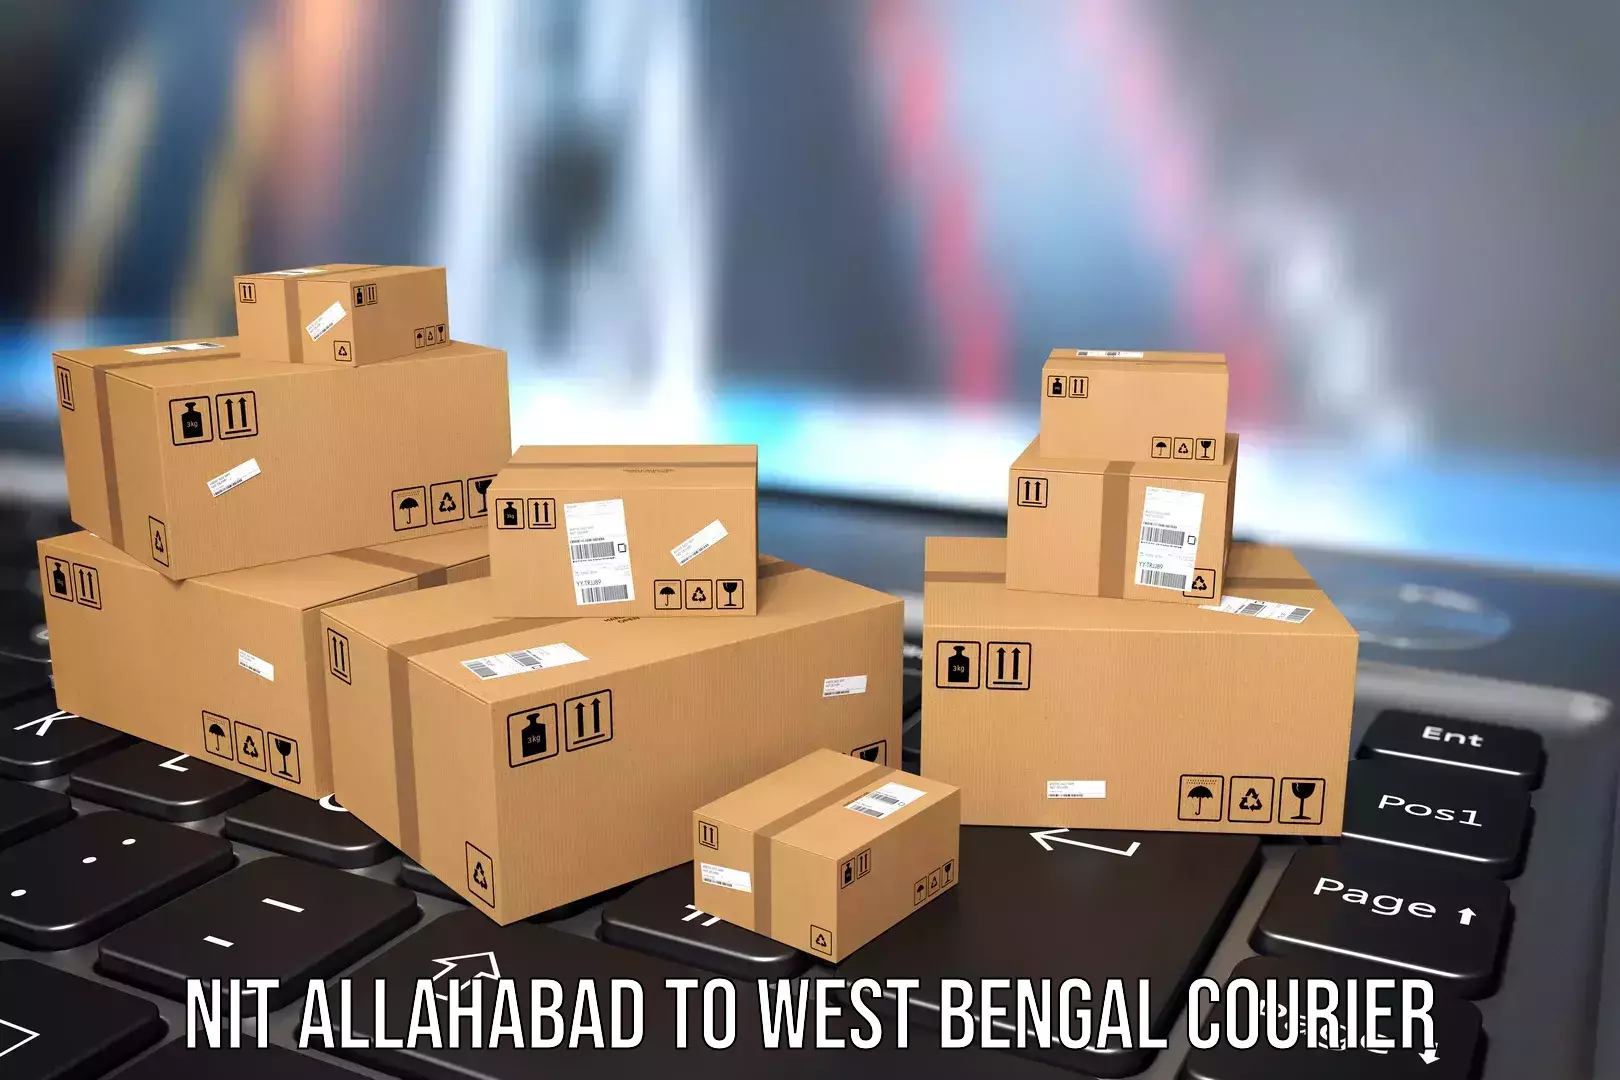 Business luggage transport in NIT Allahabad to Kolkata Port